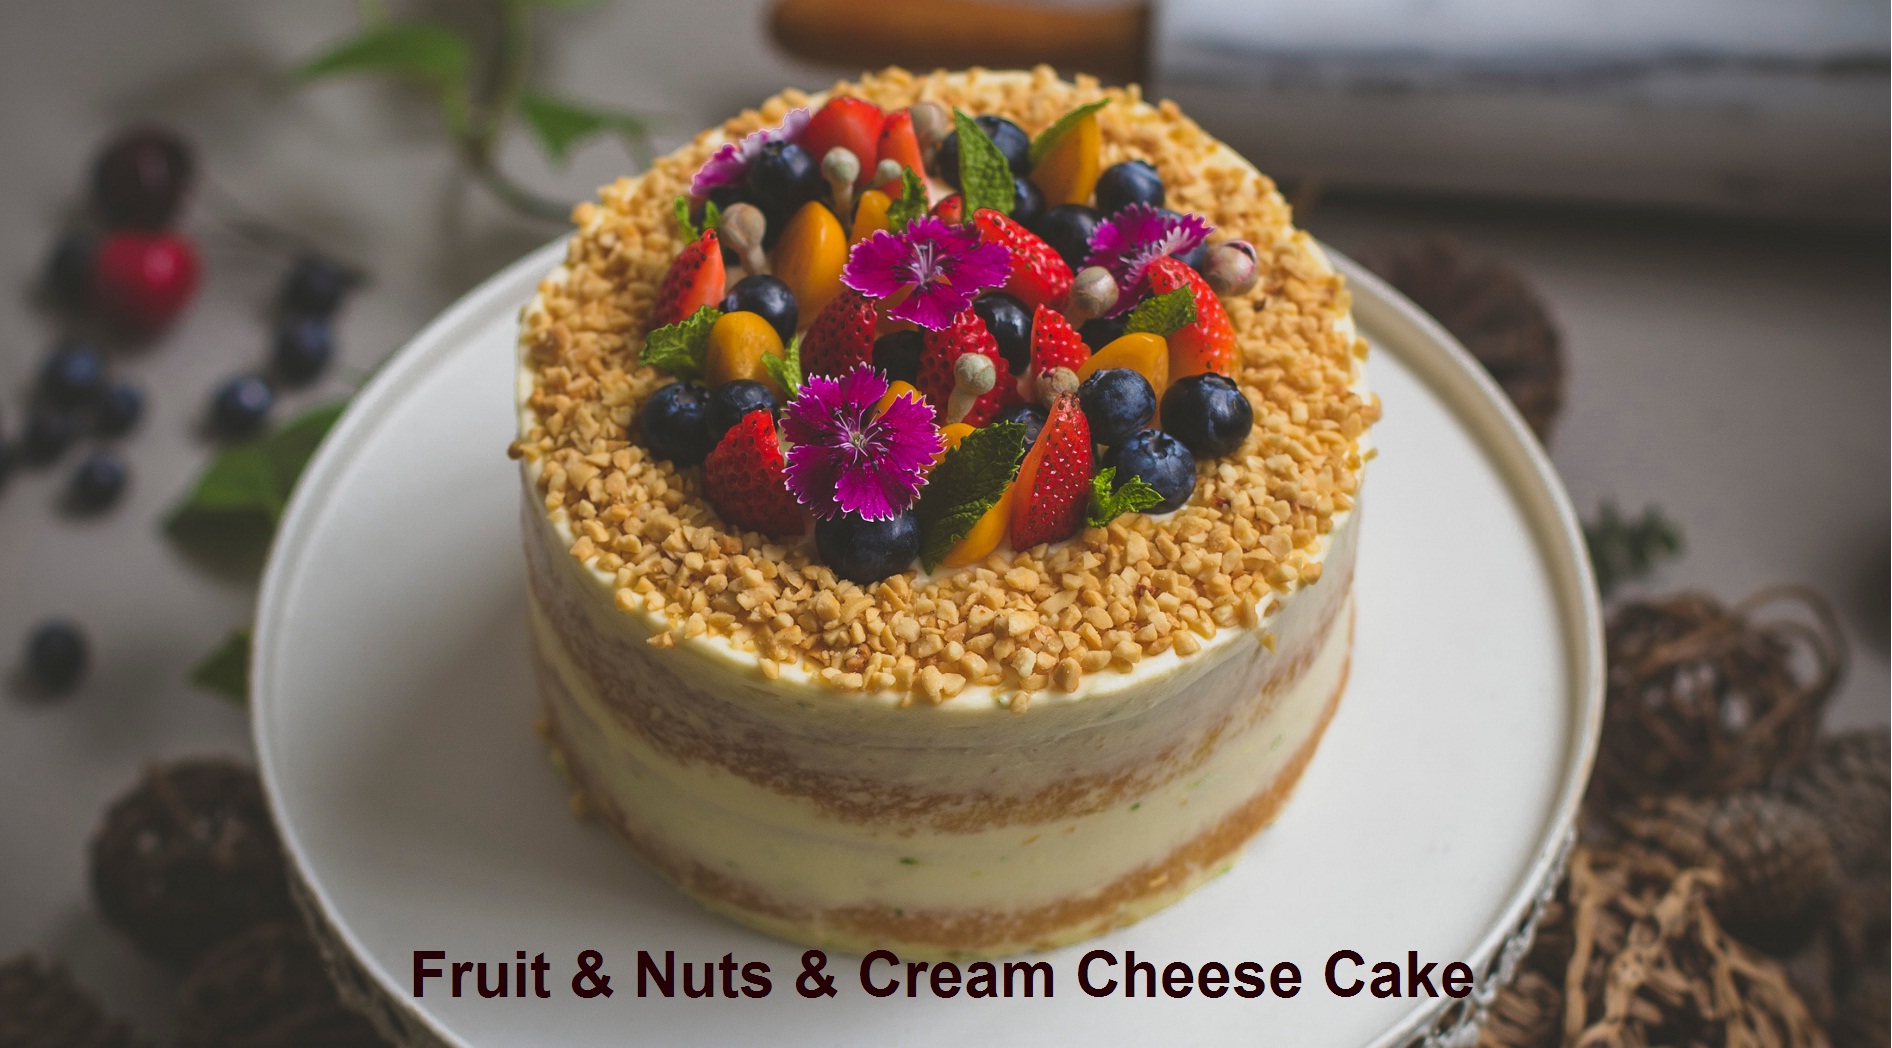 Well decorated fruit and nuts cream cheese cake